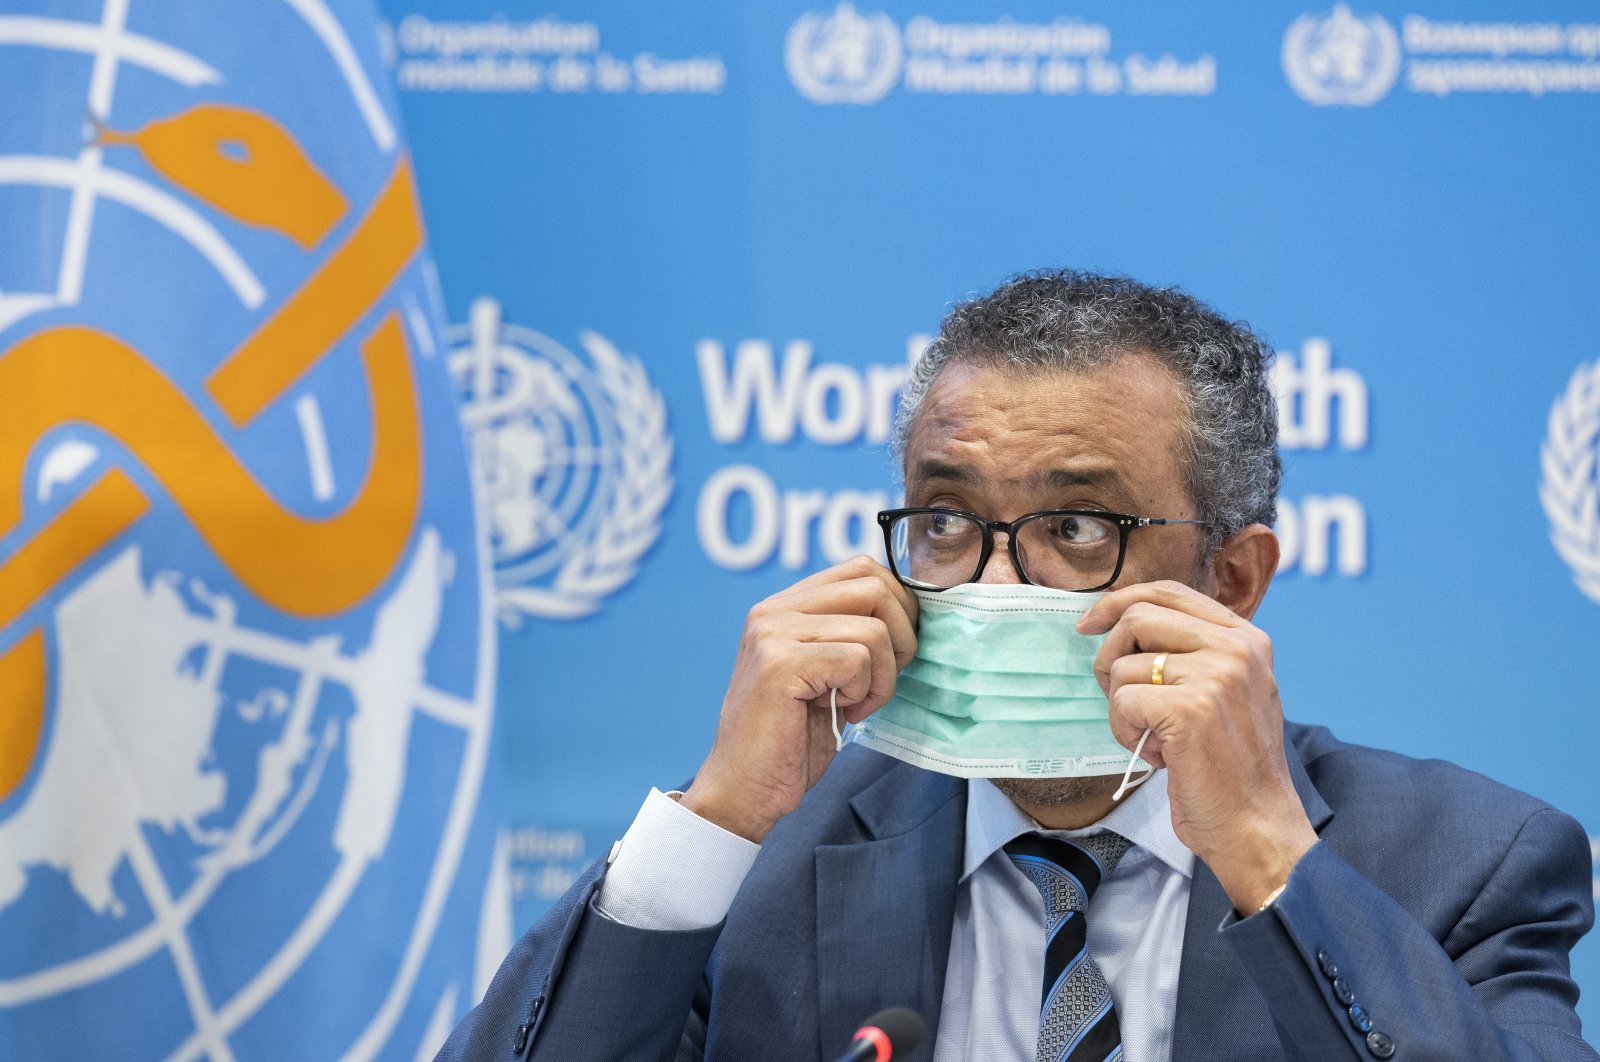 Tedros Adhanom Ghebreyesus, Director-General of the World Health Organization (WHO), removes his protective face mask prior to speaking to the media regarding the coronavirus and WHO&#039;s global health priorities in 2022, during a new press conference, at WHO headquarters in Geneva, Switzerland, Dec. 20, 2021. (AP Photo)